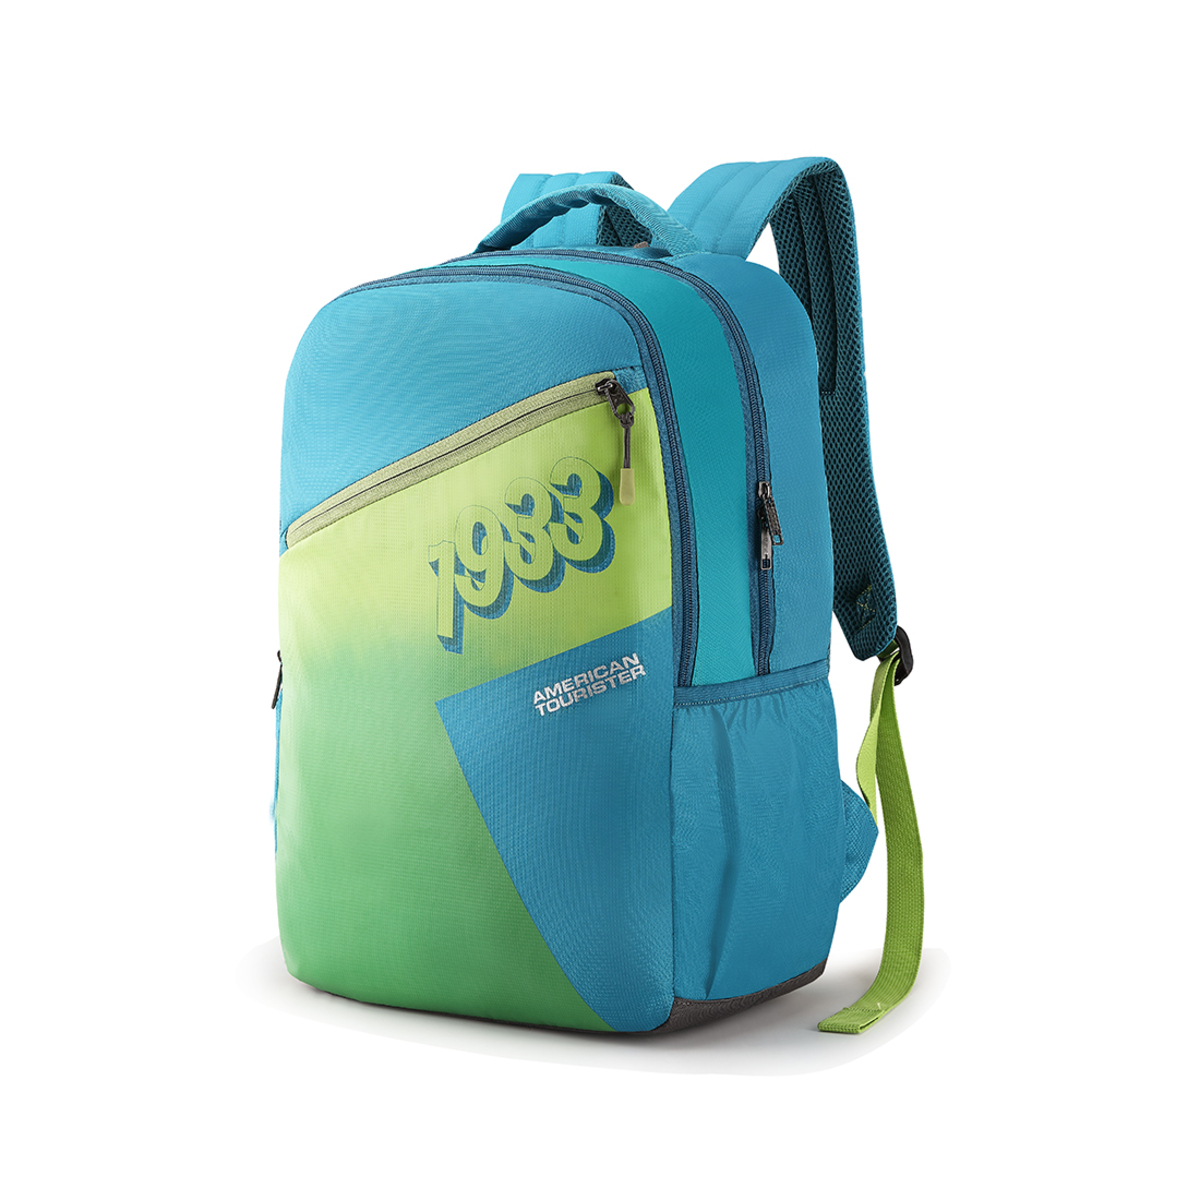 American Tourister Back Pack Twing 01 Teal